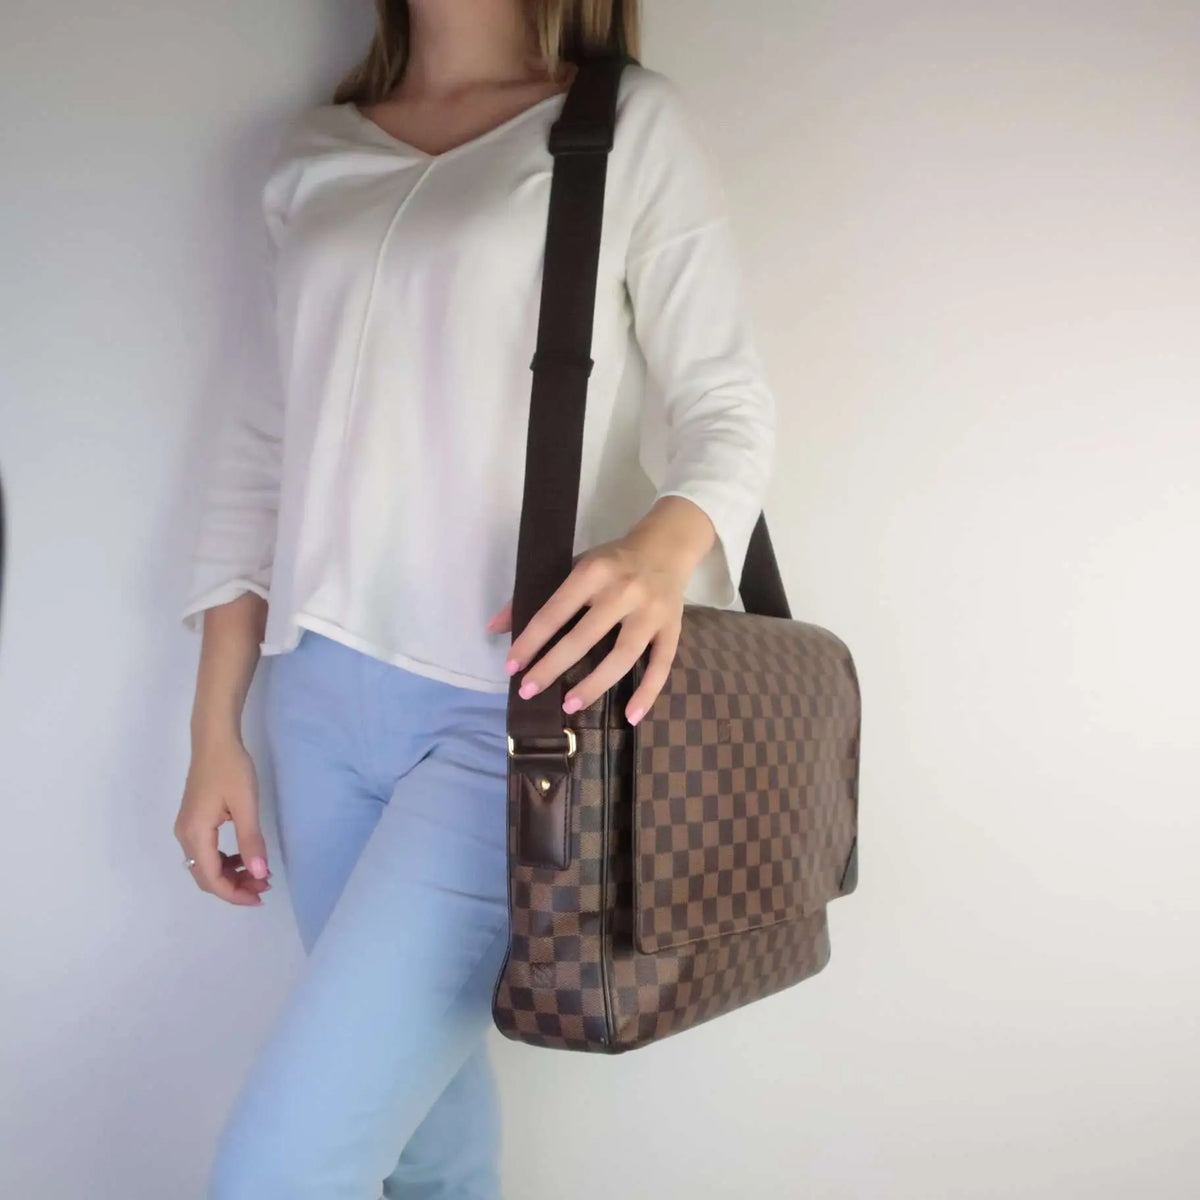 The Messenger Bag Travels With MeLouis Vuitton Hudson GM Bag - Lake Diary